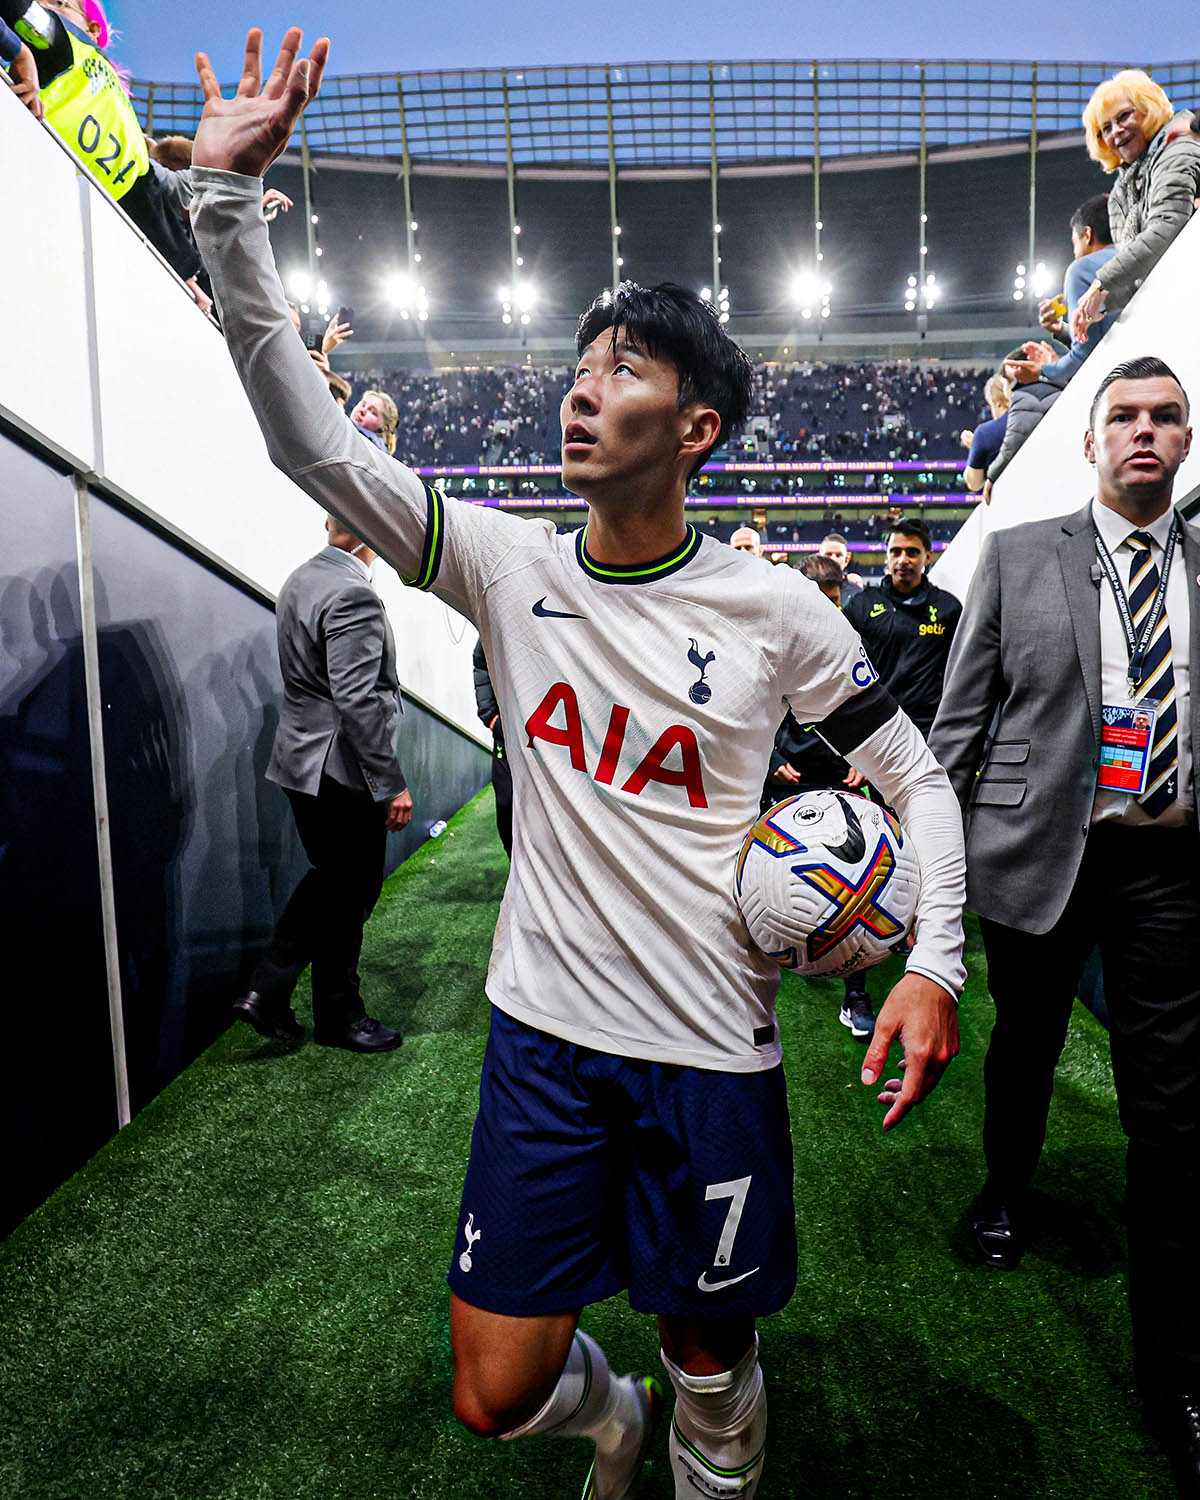 Son Heung-min Scores Hat-Trick In Spurs Win, HIGHLIGHTS